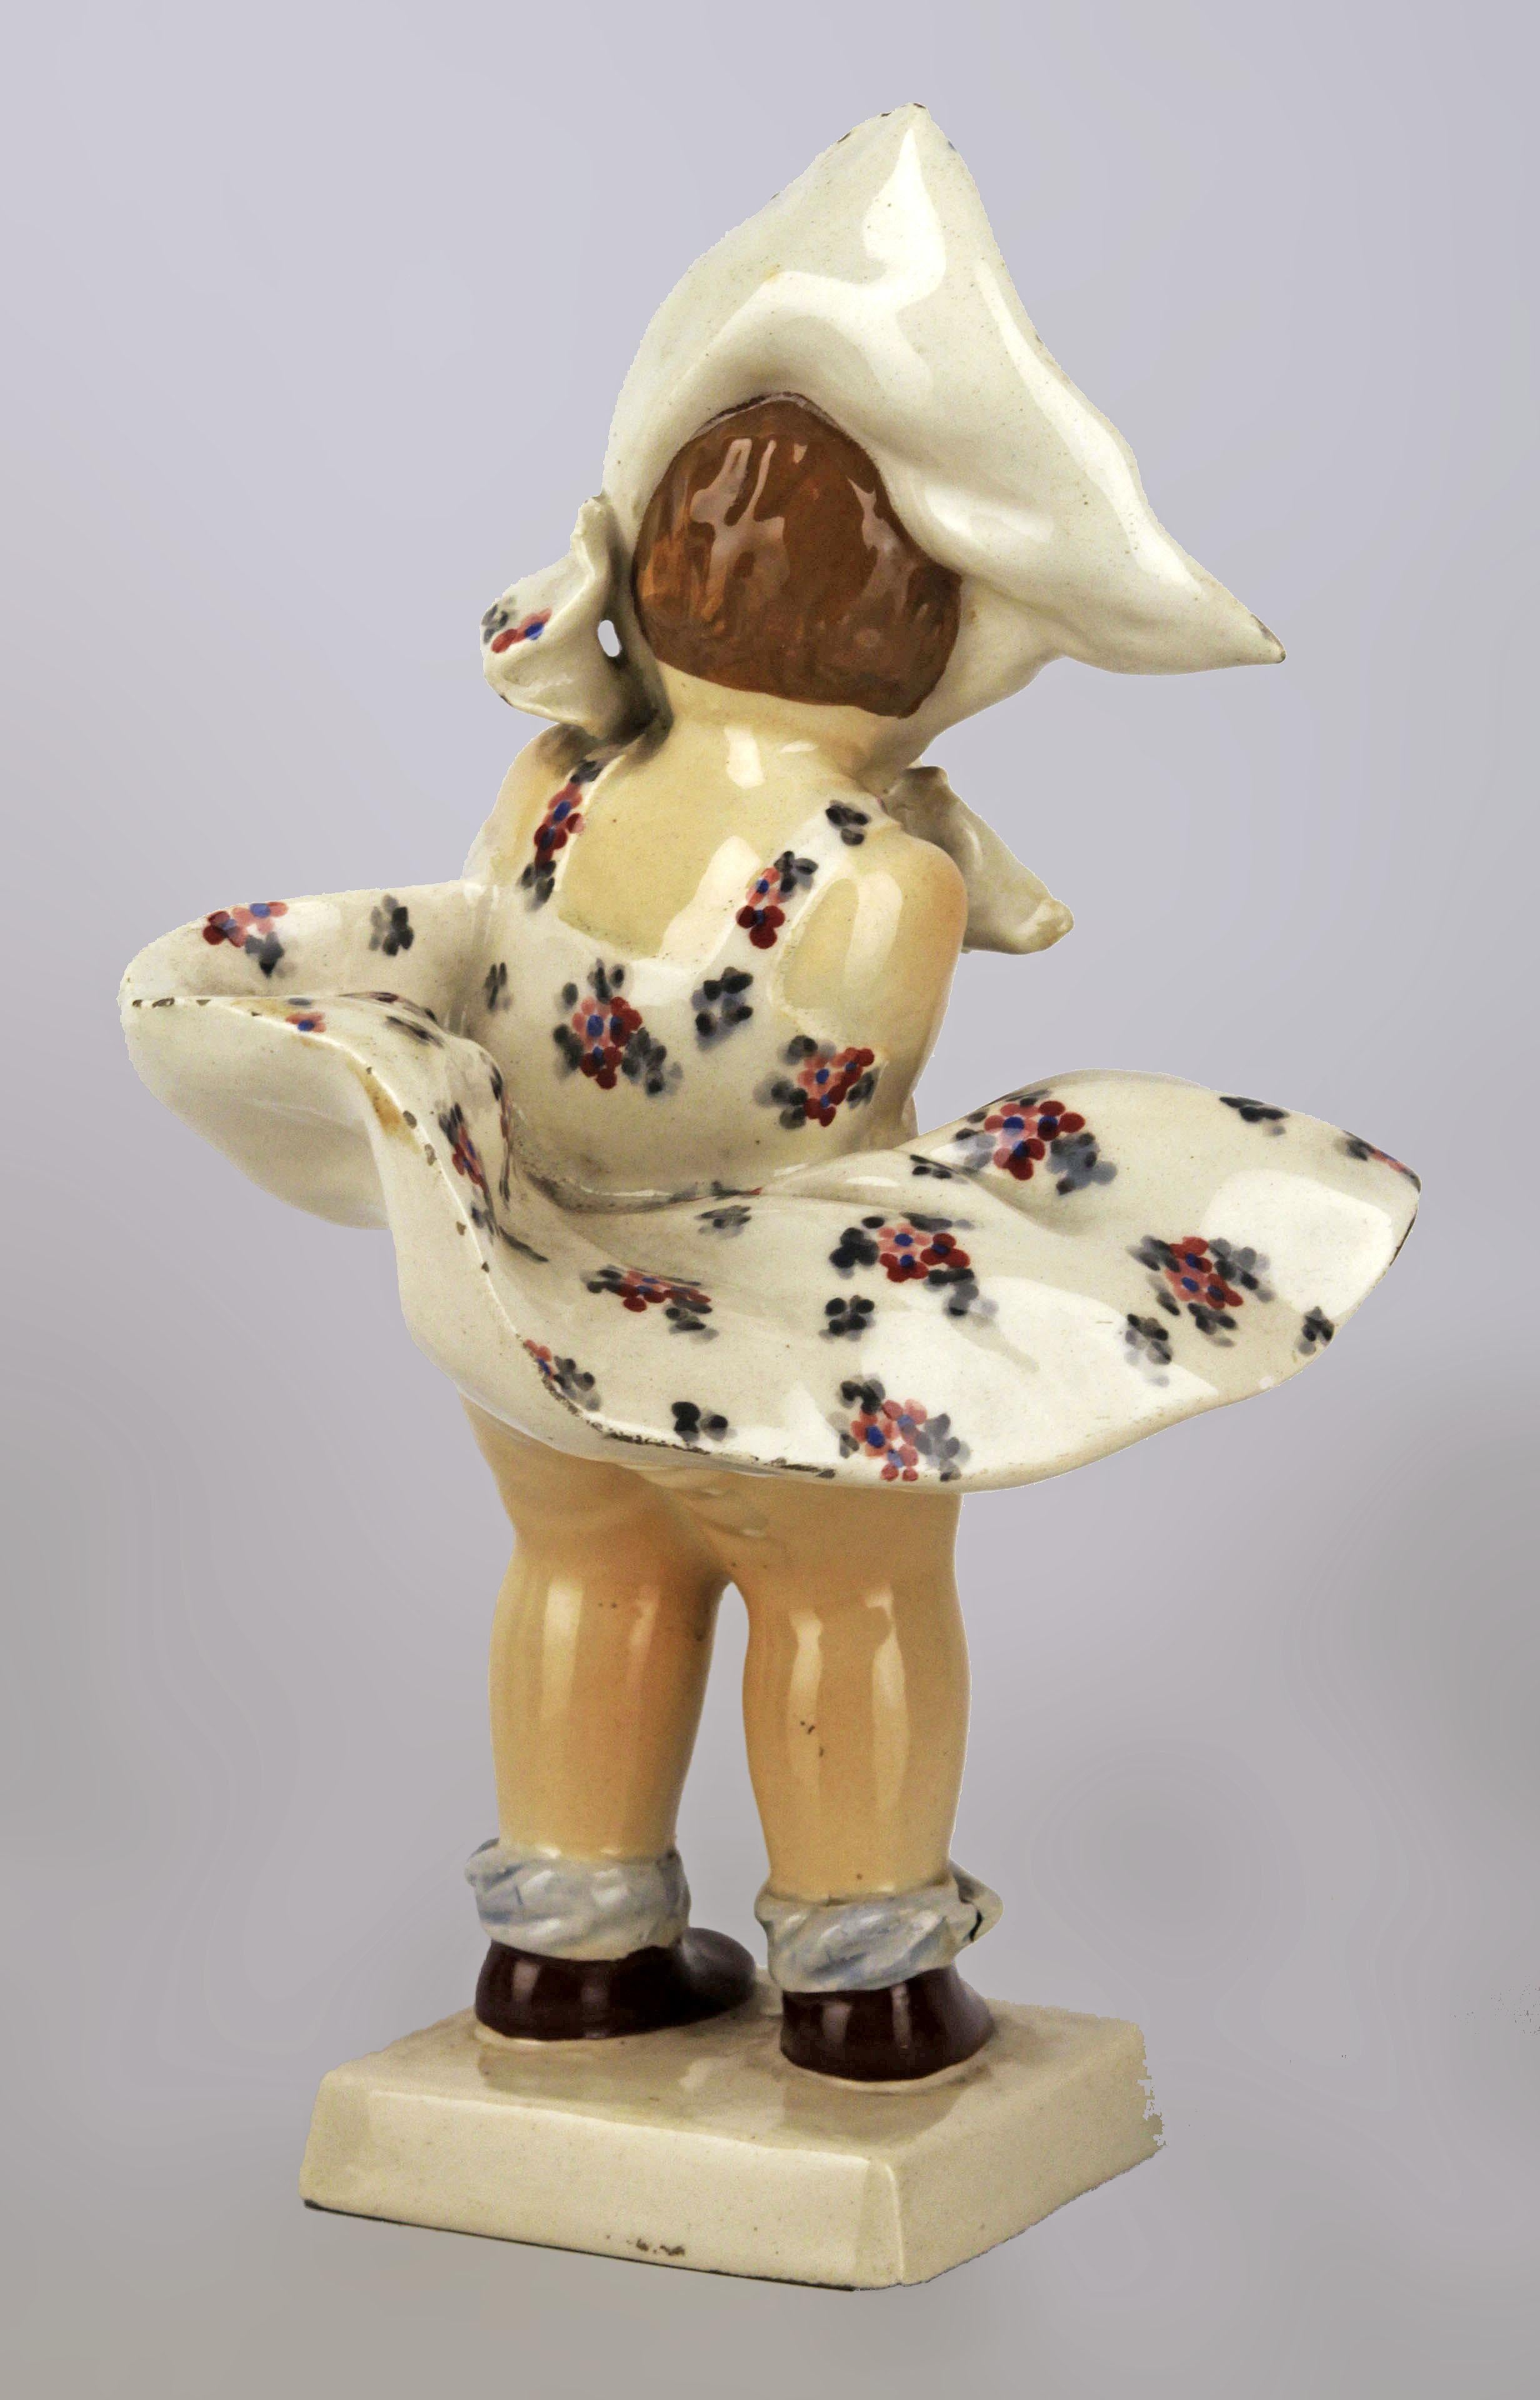 Italian 1950s Torino Hand-Painted Glazed Ceramic Sculpture of Girl and Dog by C. Mollica For Sale